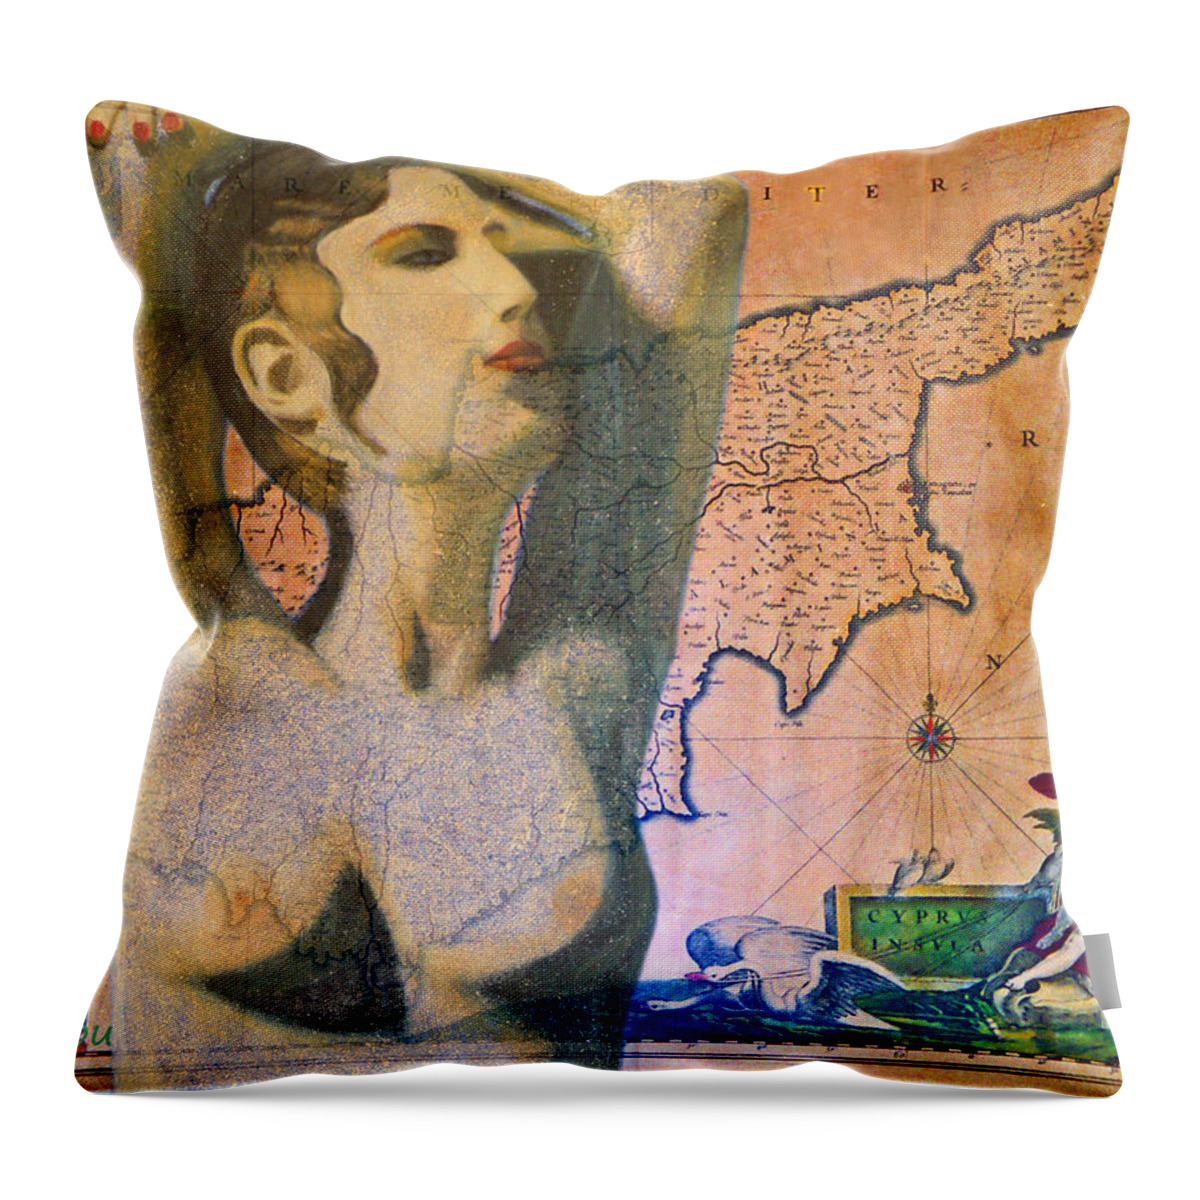 Augusta Stylianou Throw Pillow featuring the digital art Ancient Cyprus Map and Aphrodite by Augusta Stylianou